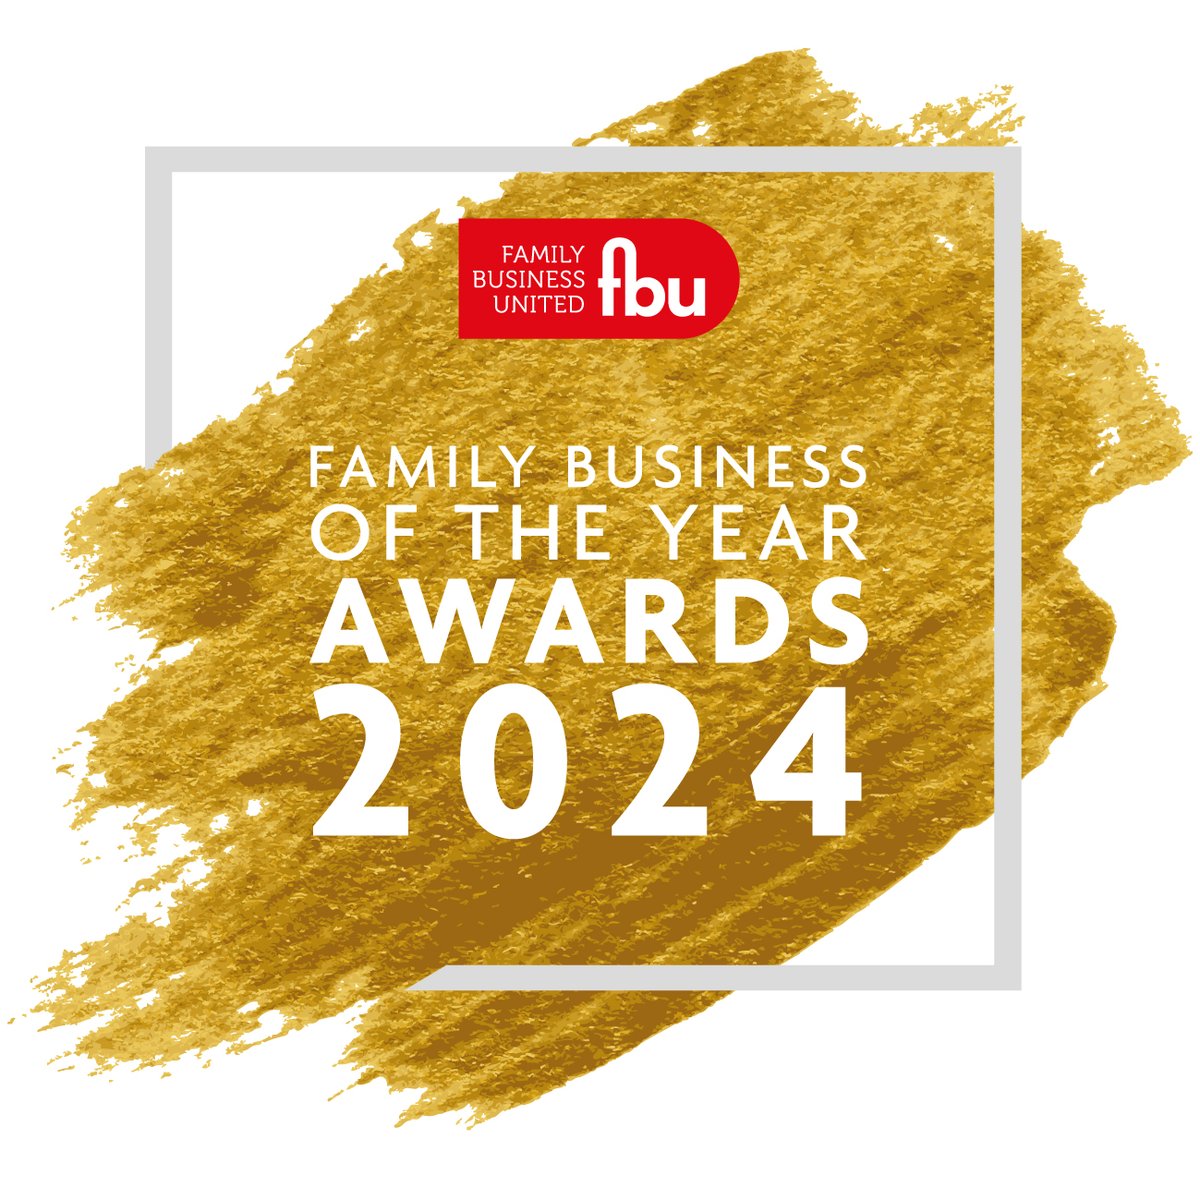 It's time to make your voice heard in the @FamilyBizPaulAwards 2024! These #awards celebrate the best of British family businesses & your support is crucial to helping us secure the title of People's Choice Champions '24. Cast your vote before 31/03: bit.ly/48GUCYU